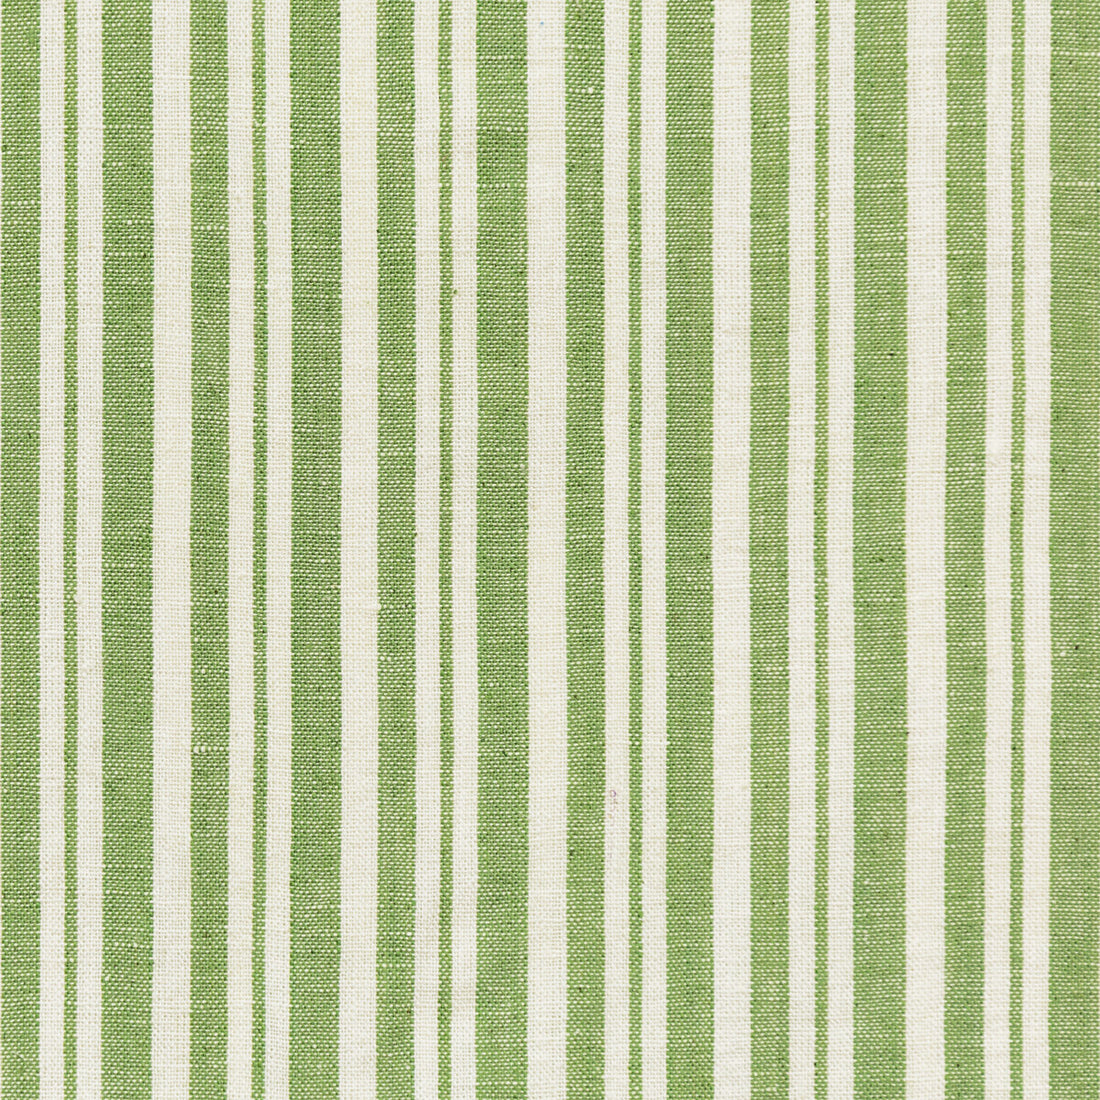 Jaffna fabric in leaf color - pattern 35765.13.0 - by Kravet Basics in the Ceylon collection